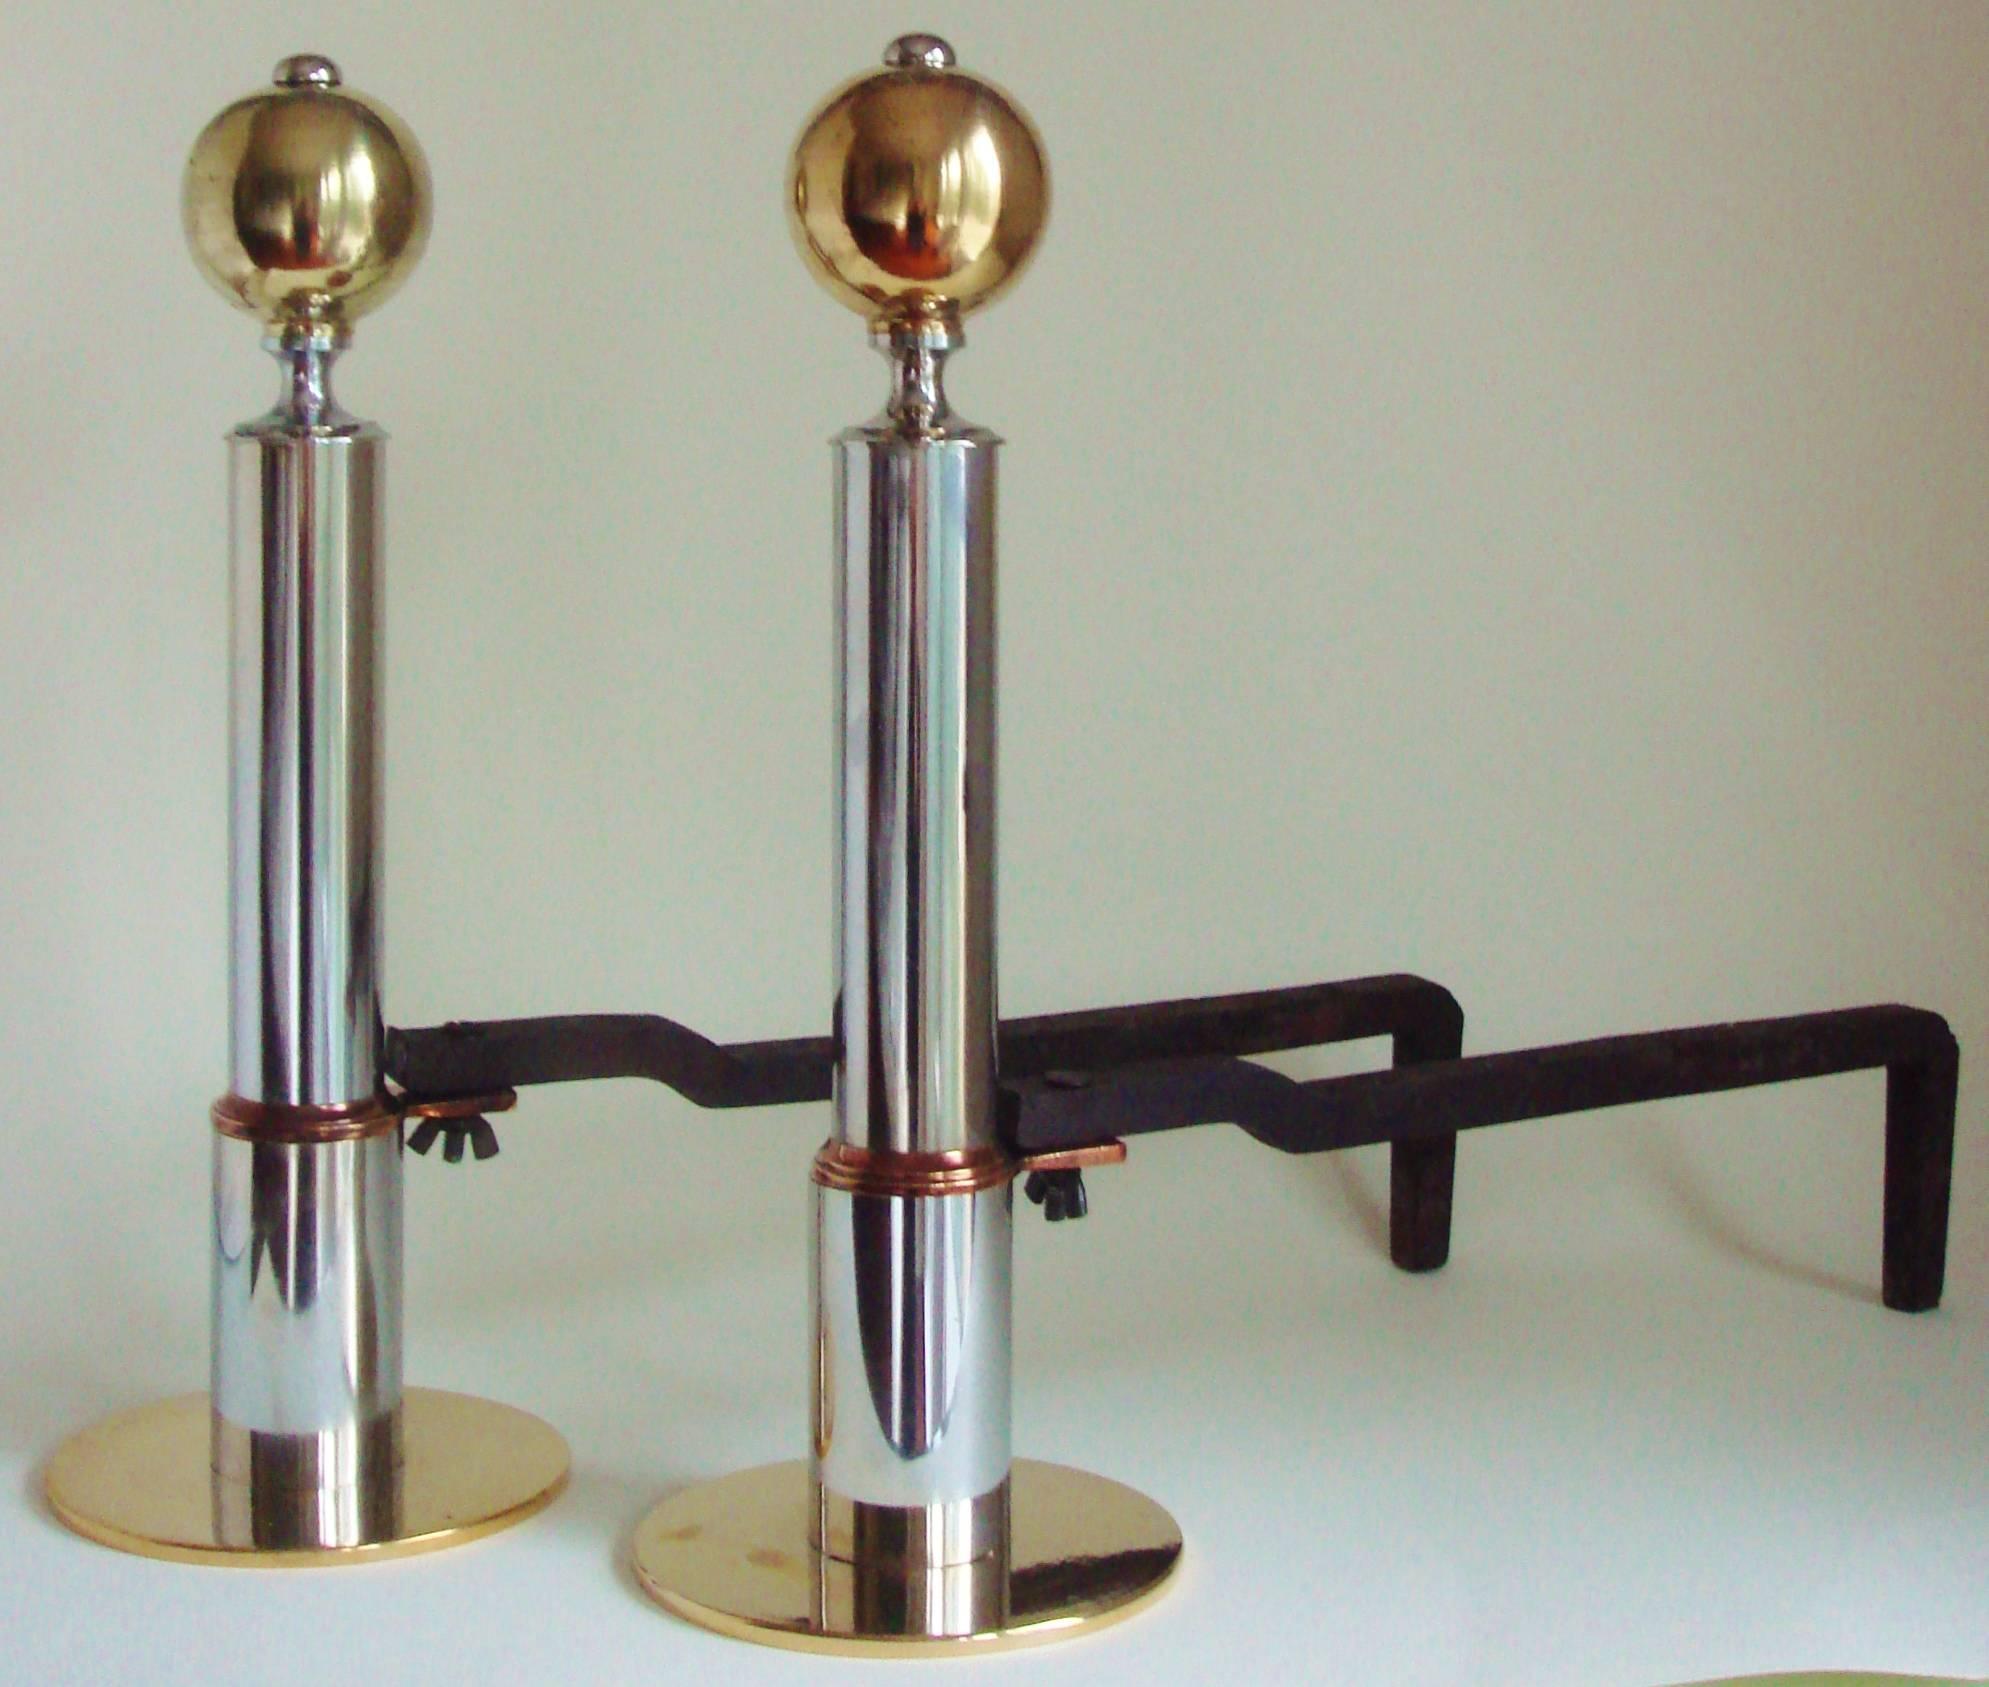 This pair of American Art Deco andirons have been totally restored and feature a 6" diameter brass disk base that supports a two-tier chrome column with the tiers separated by a copper ring. The columns are topped with a 3" brass sphere